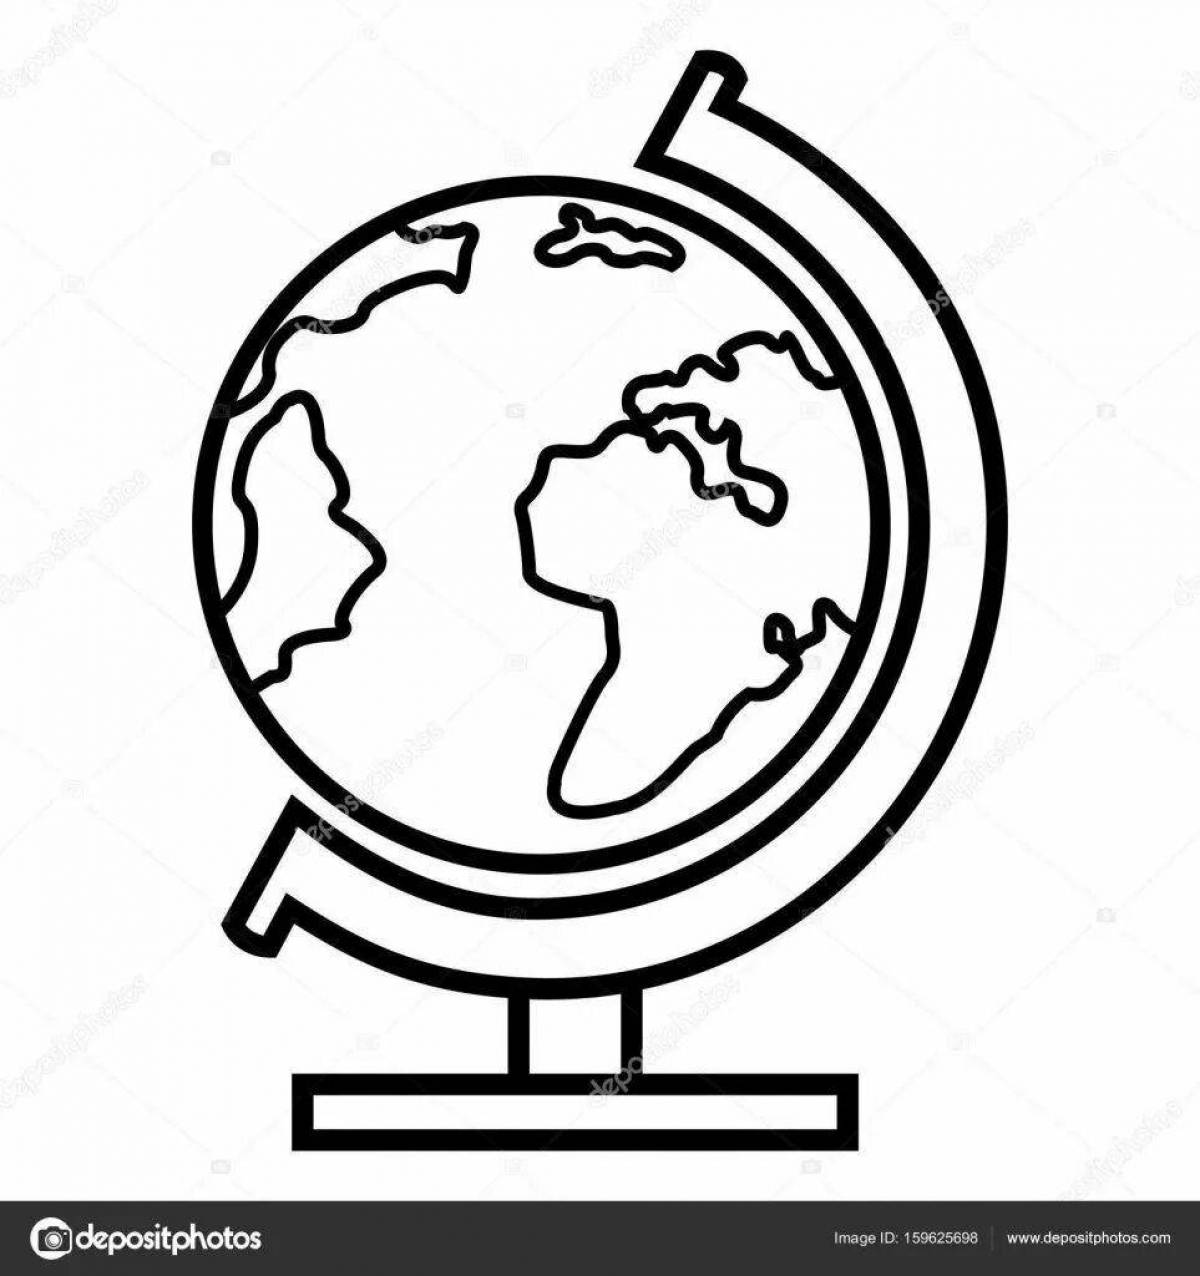 Globe drawing for kids for #9